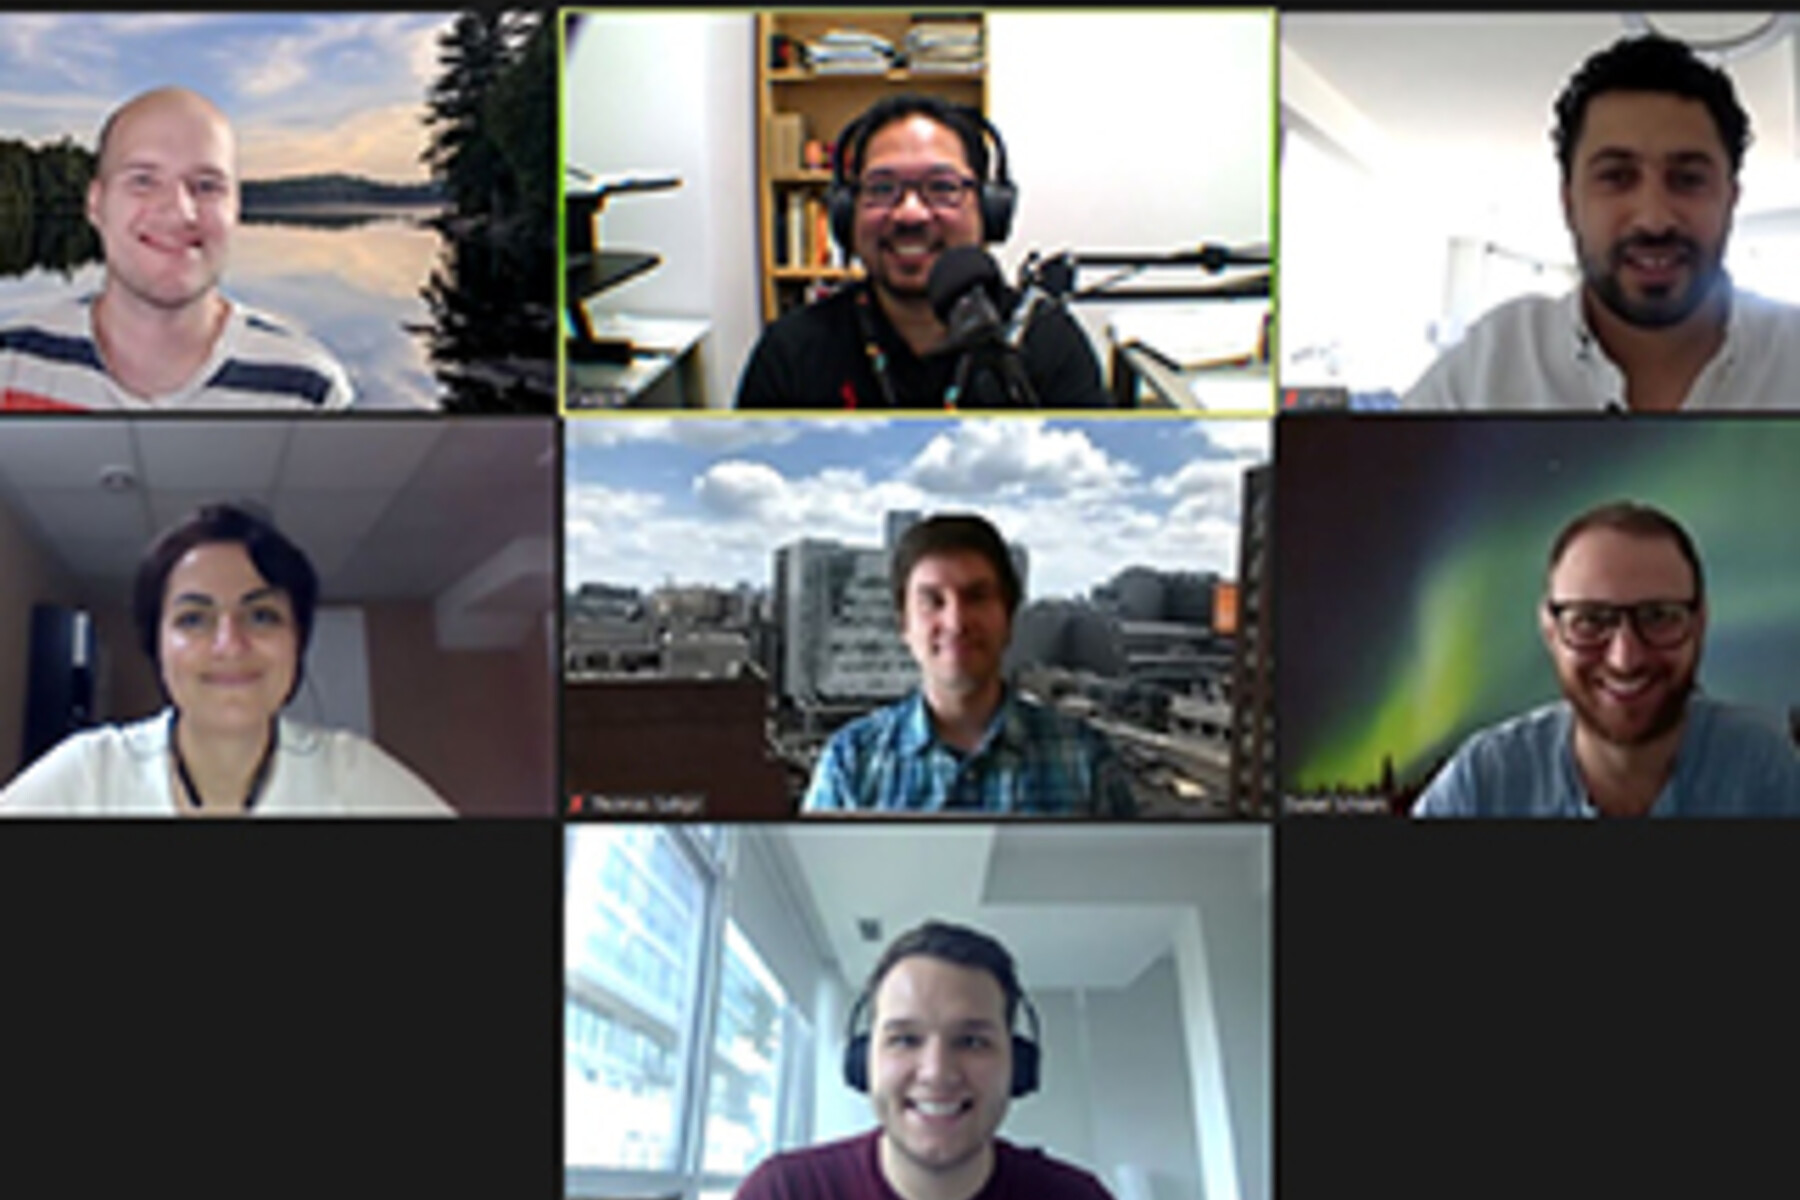 A screenshot of several people on a Zoom call